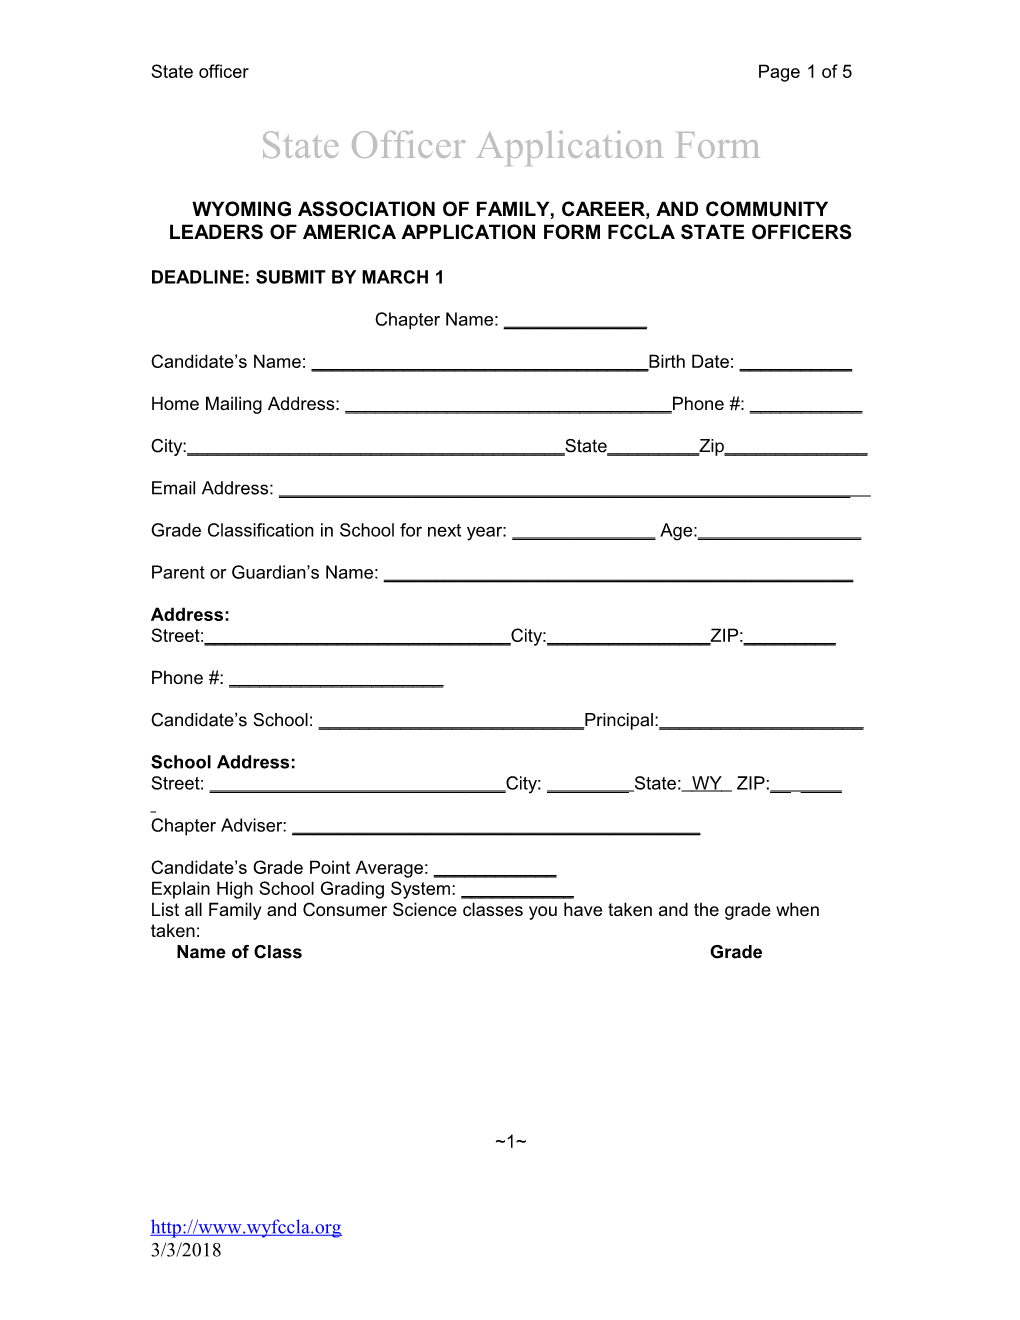 State Officer Application Form